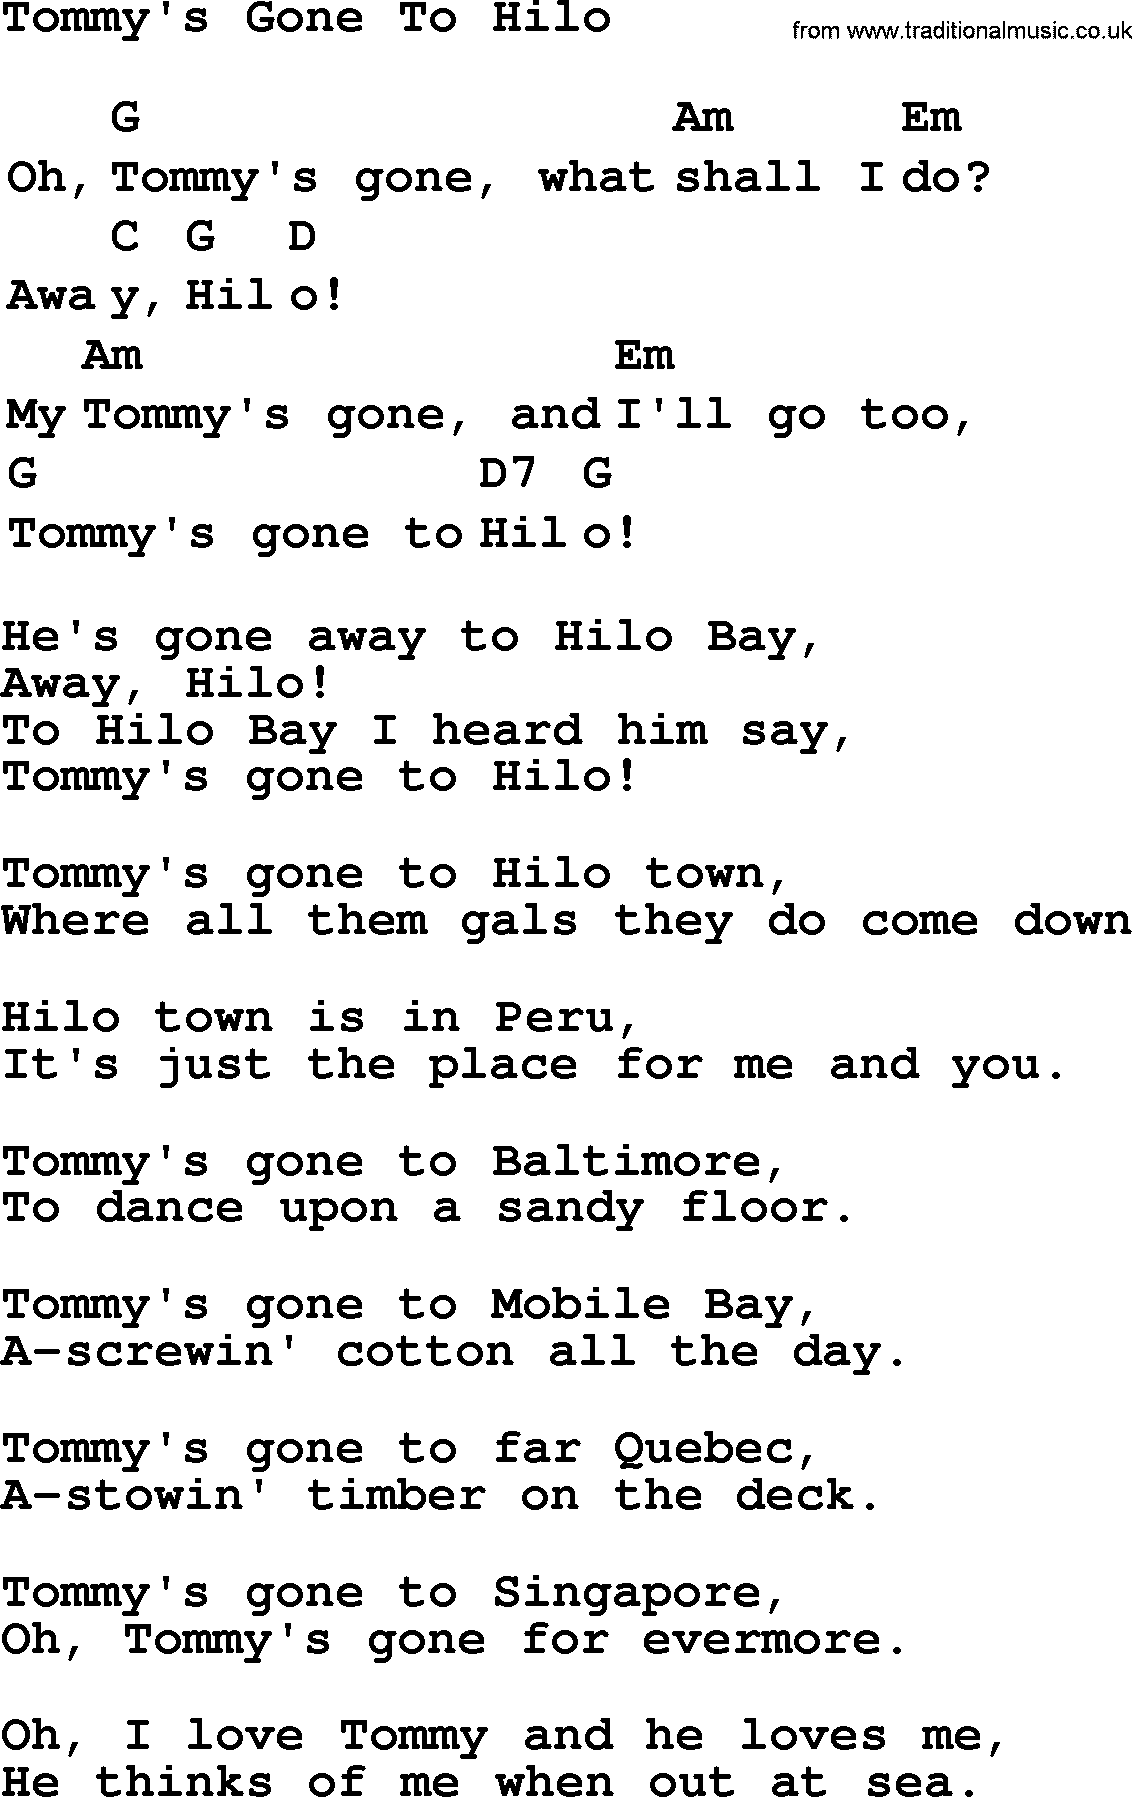 Top 1000 Most Popular Folk and Old-time Songs: Tommys Gone To Hilo, lyrics and chords